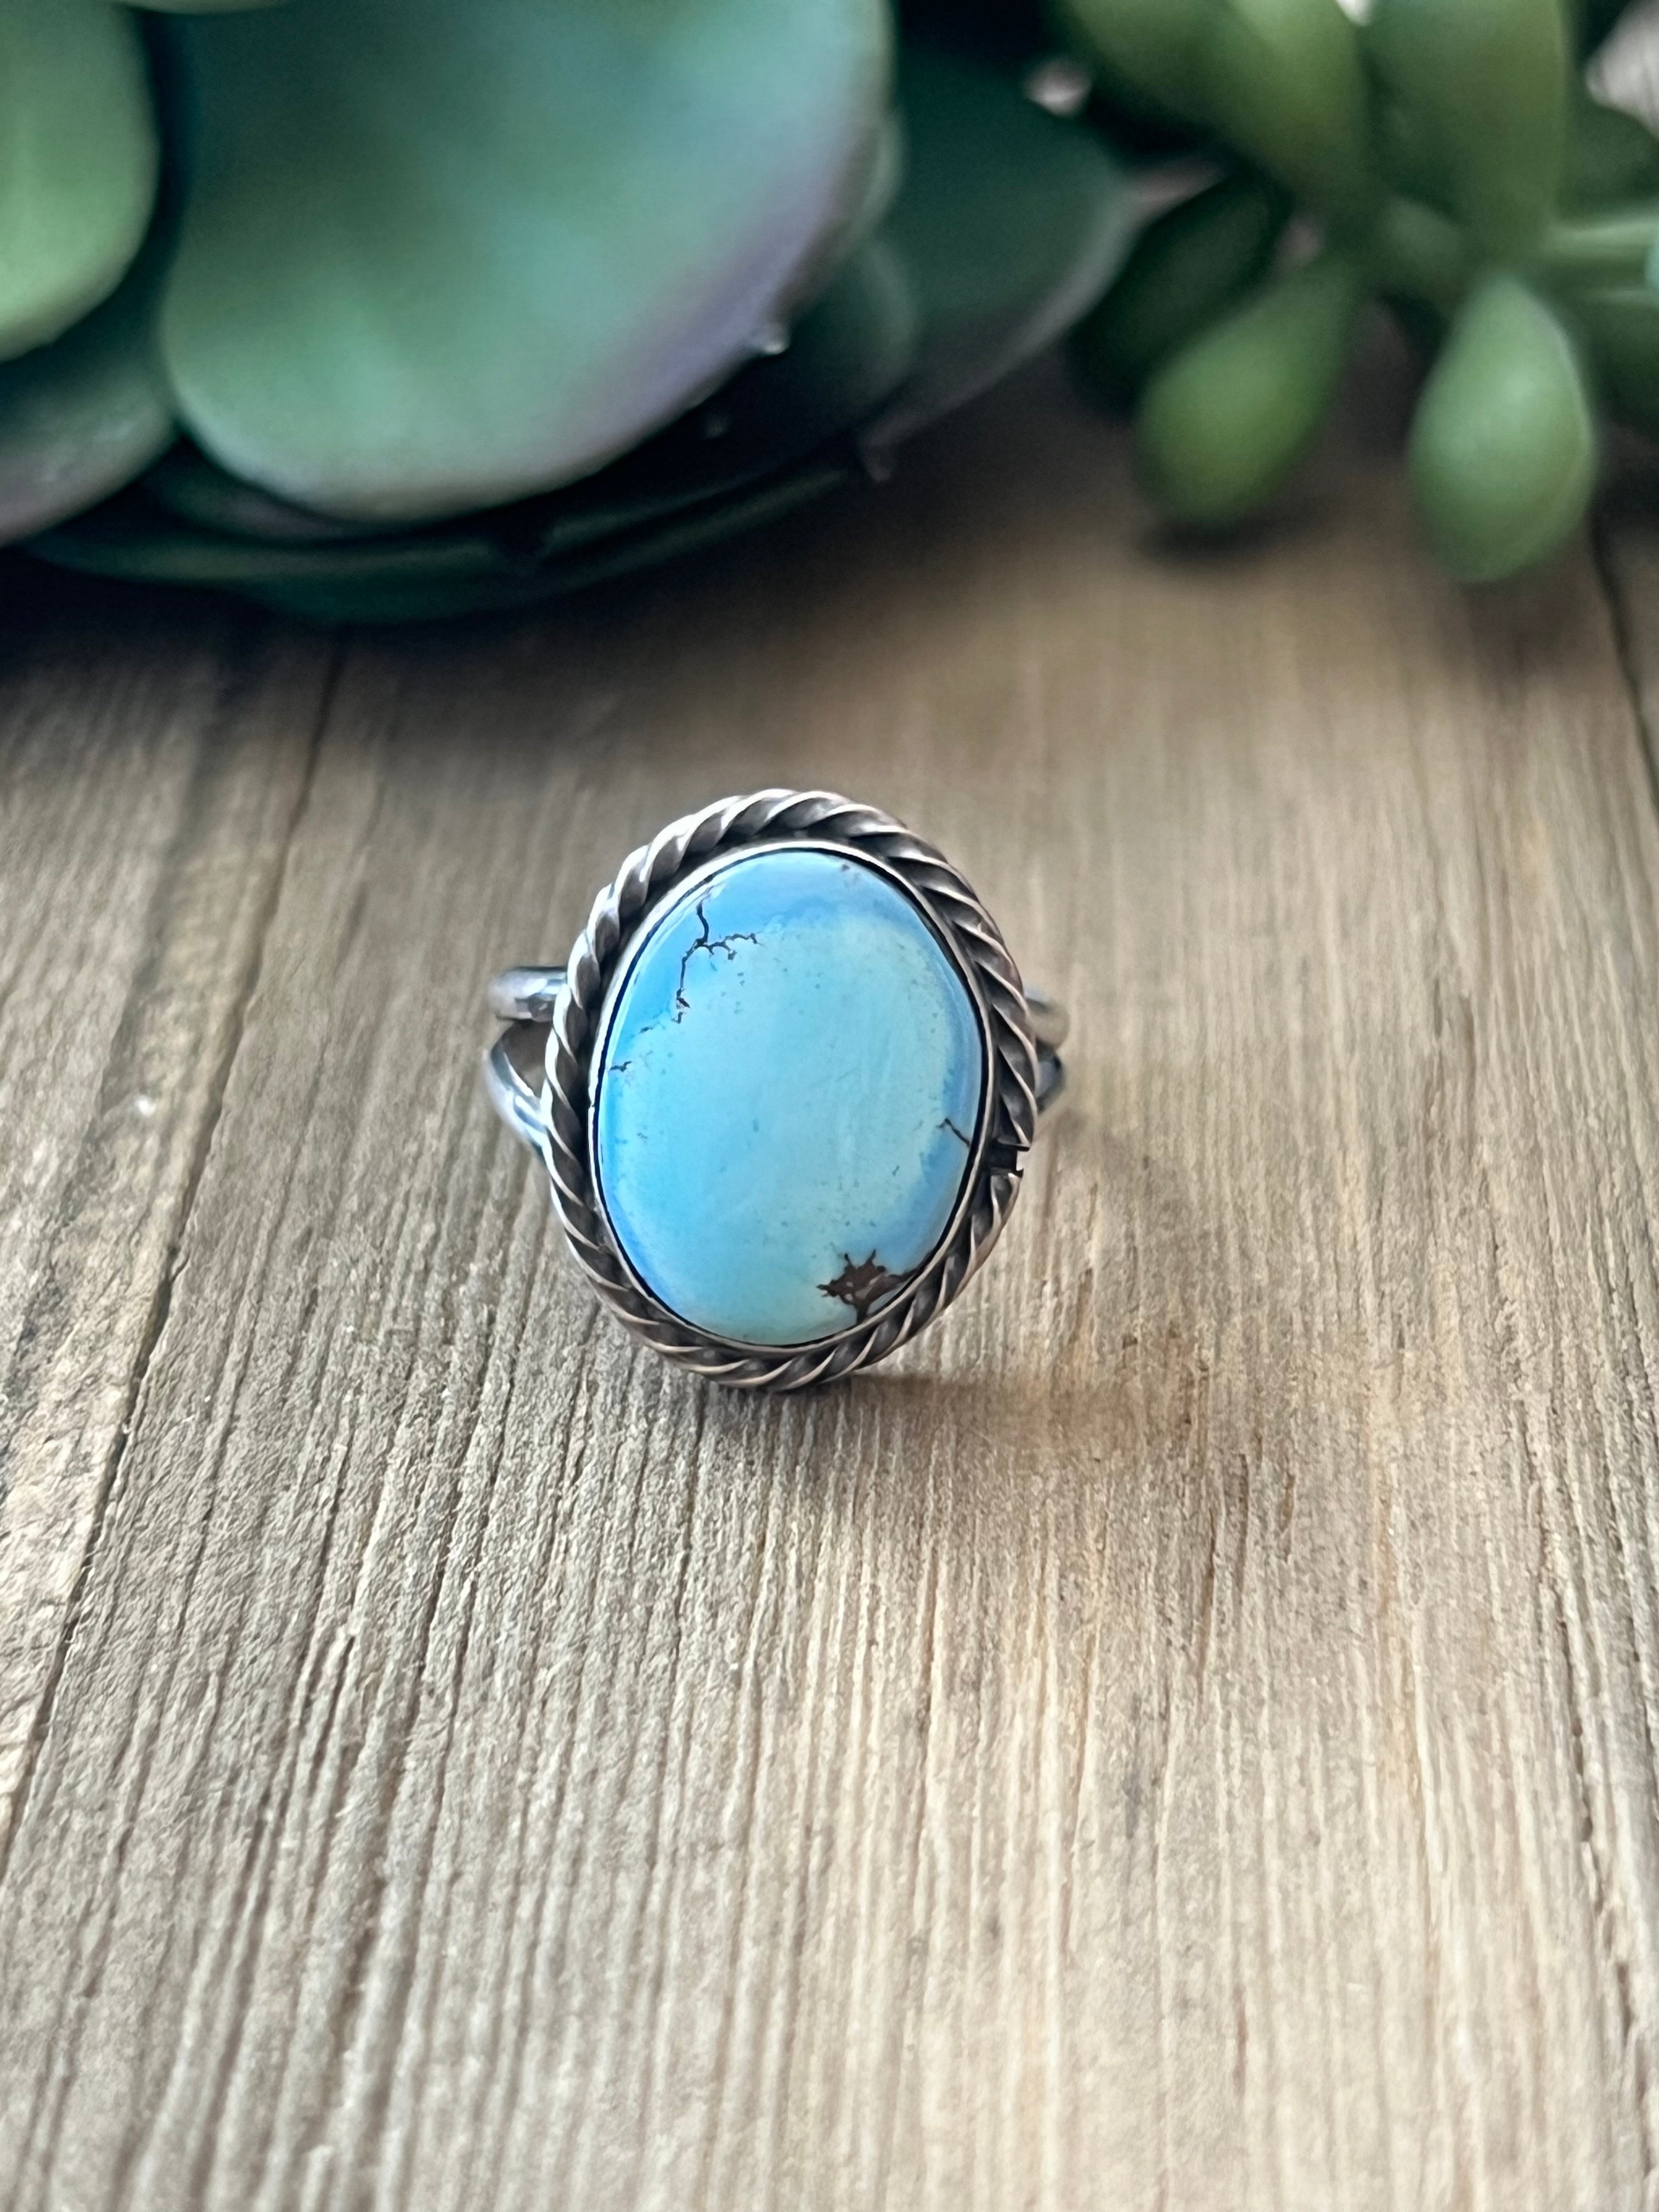 Navajo Made Golden Hills Turquoise & Sterling Silver Ring Size 5.5